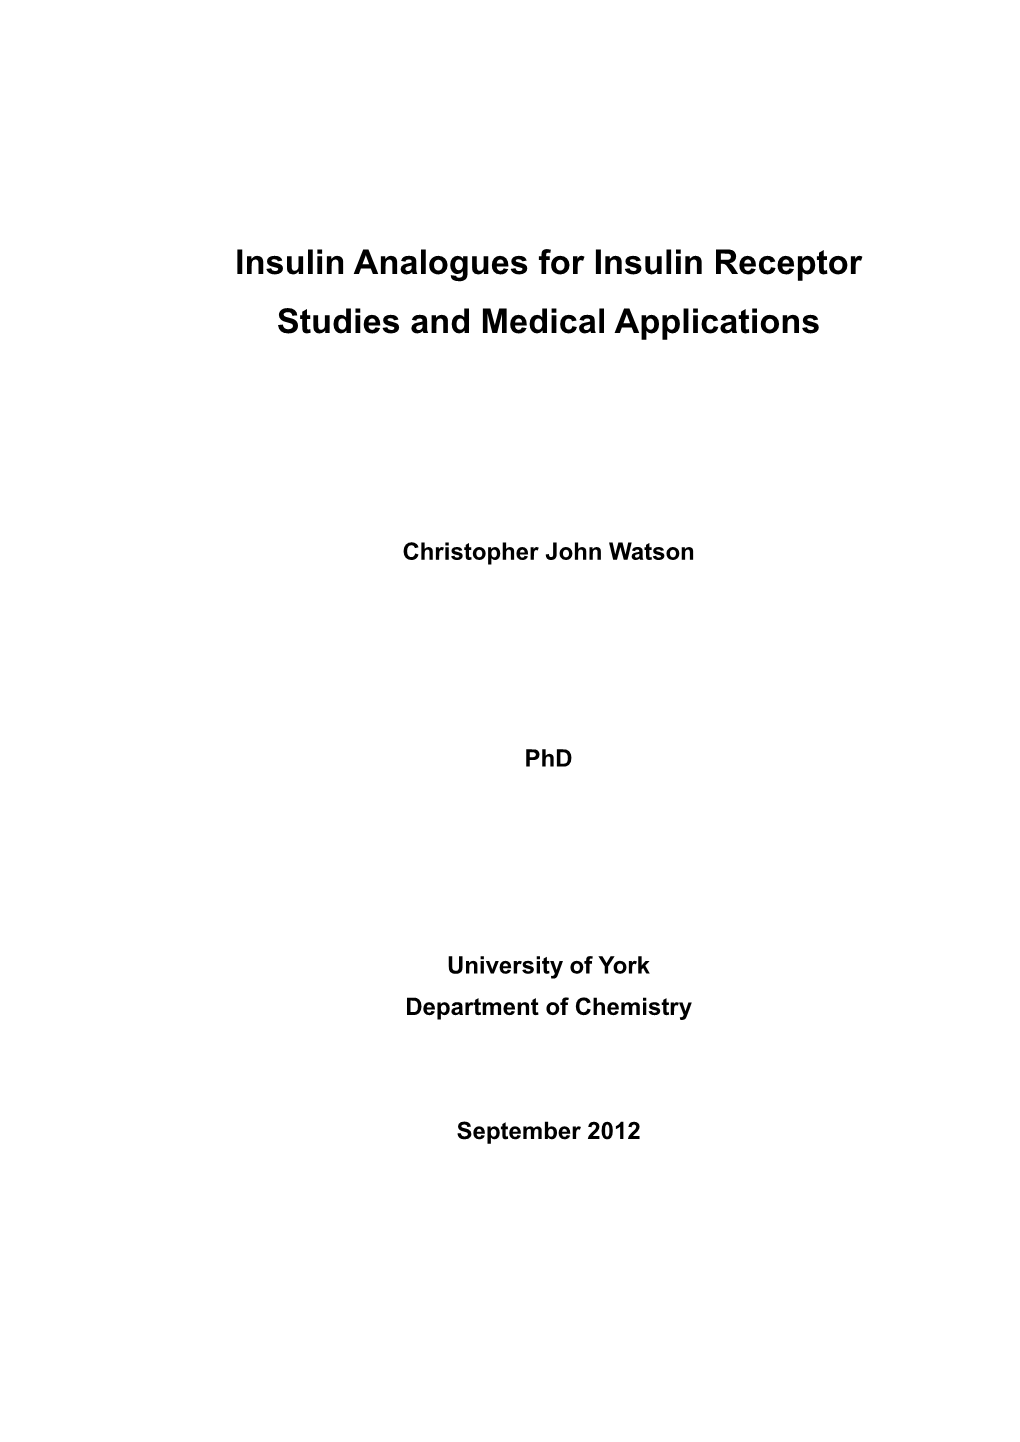 Insulin Analogues for Insulin Receptor Studies and Medical Applications